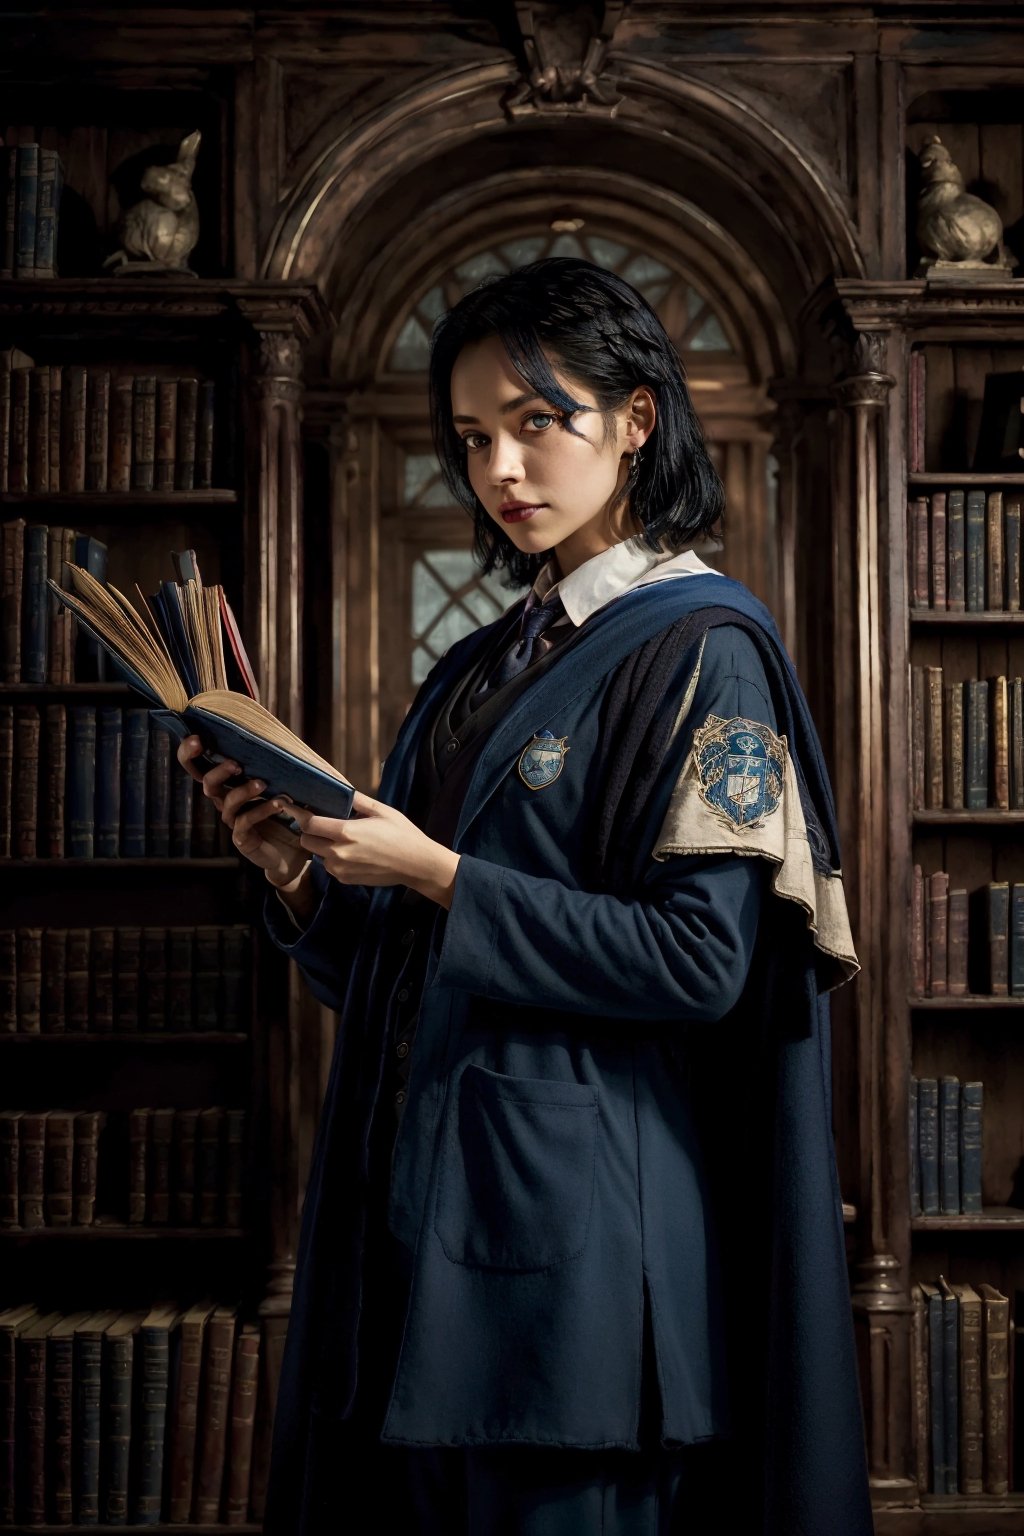 Hogwarts Ravenclaw woman student with book in her hands with Hogwarts library on background 8k quality, blue shades, her school uniform is pants, blue vest with long black and blue cloak with Ravenclaw sign, blue eyes, black hair, the image must be striking and high impact, magic photo style, the woman should have an elegant and cunning appearance, blue glow from her book, the background must be dark and magic, night and magic atmosphere, the image must have 8k resolution and a high level of detail, full body, (artistic pose of a woman),NCT0,photorealistic